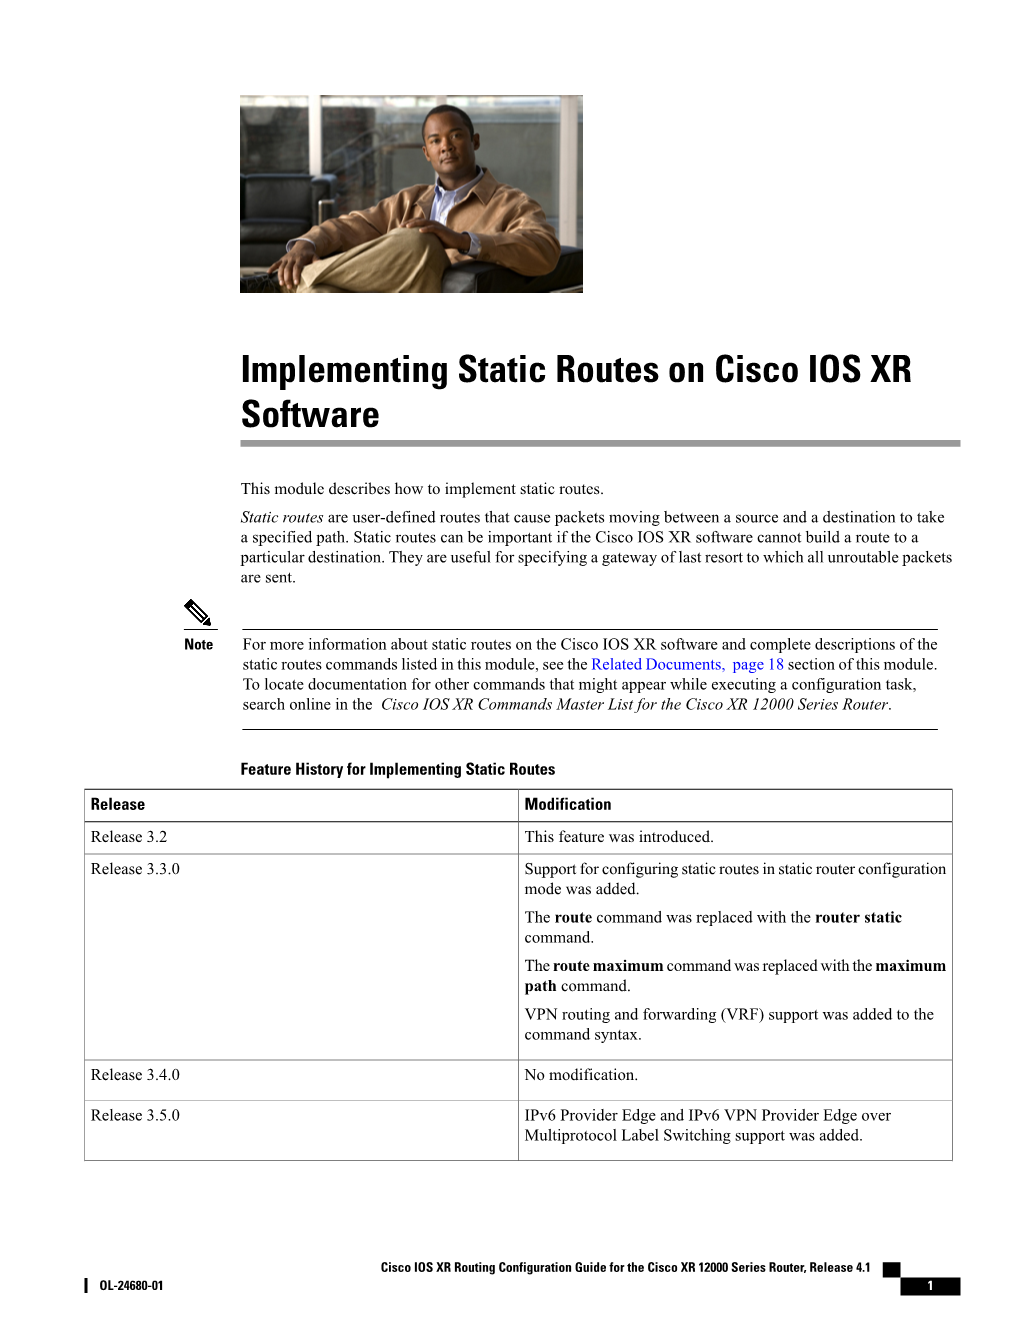 Implementing Static Routes on Cisco IOS XR Software